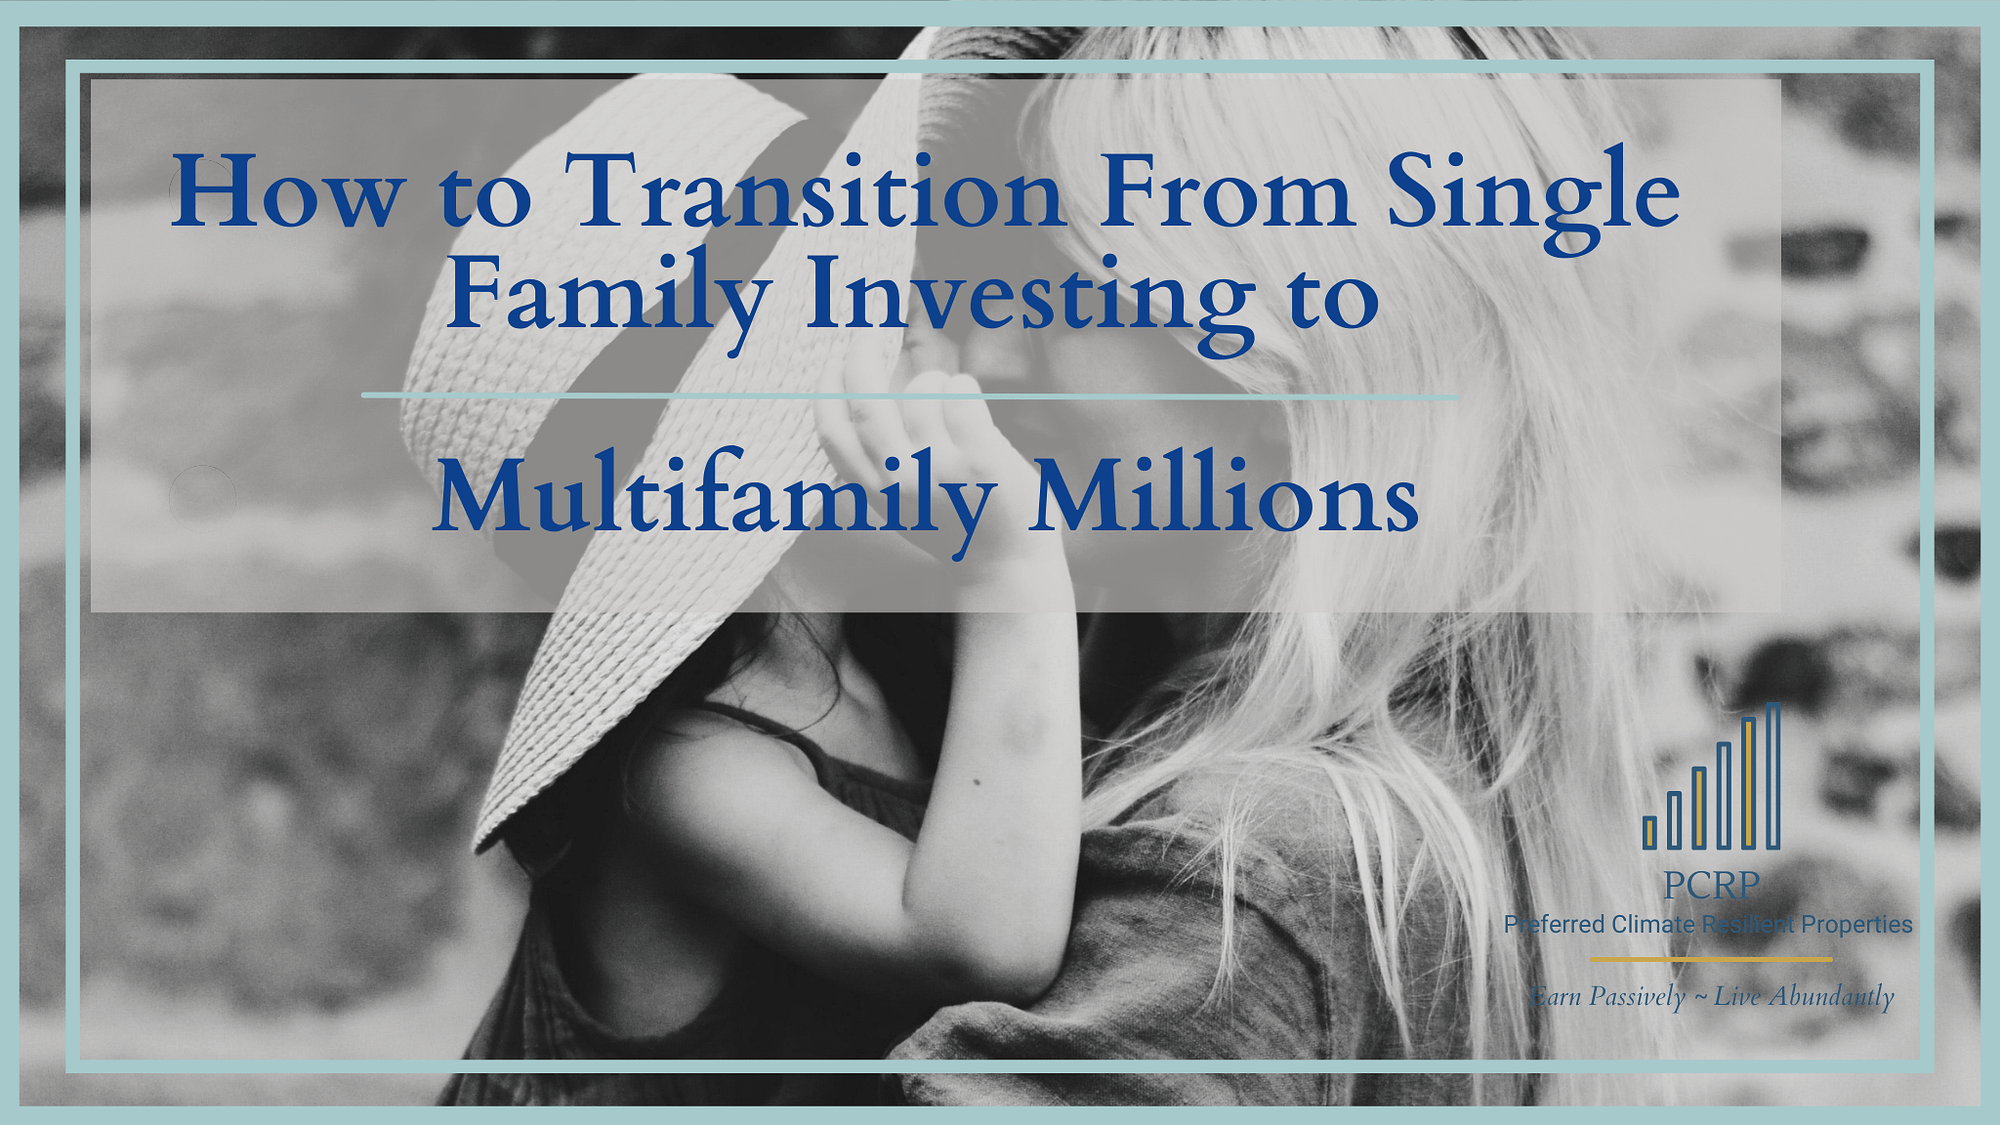 How to Transition From Single Family Investing to Multifamily Millions